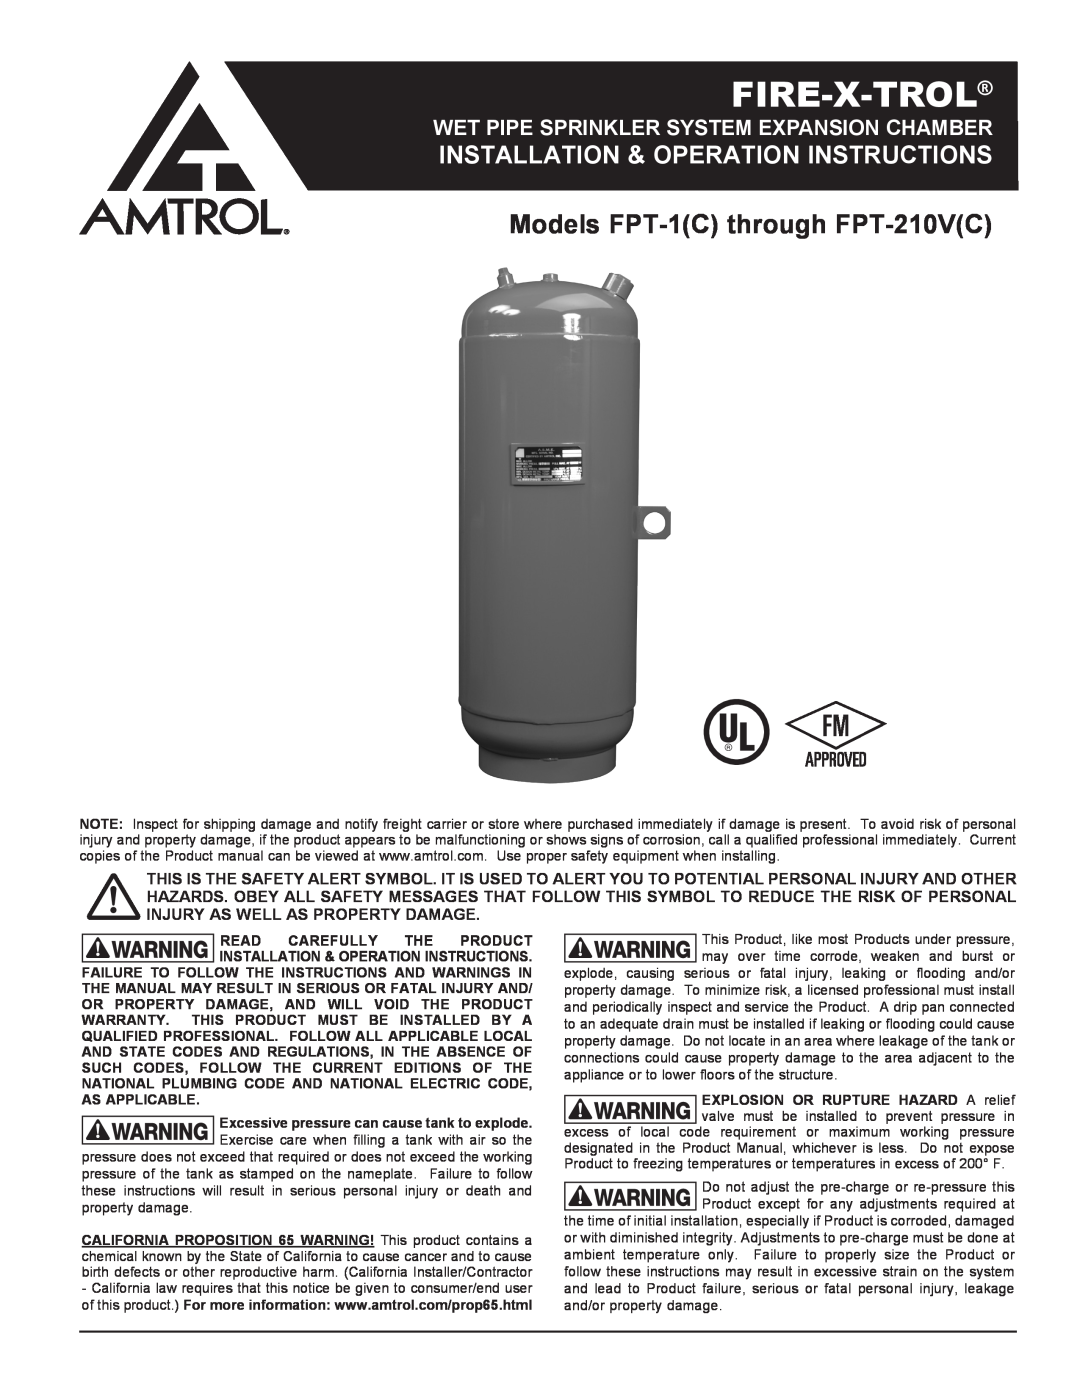 Amtrol fpt-1 warranty Fire-X-Trol, Models FPT-1Cthrough FPT-210VC, Installation & Operation Instructions 